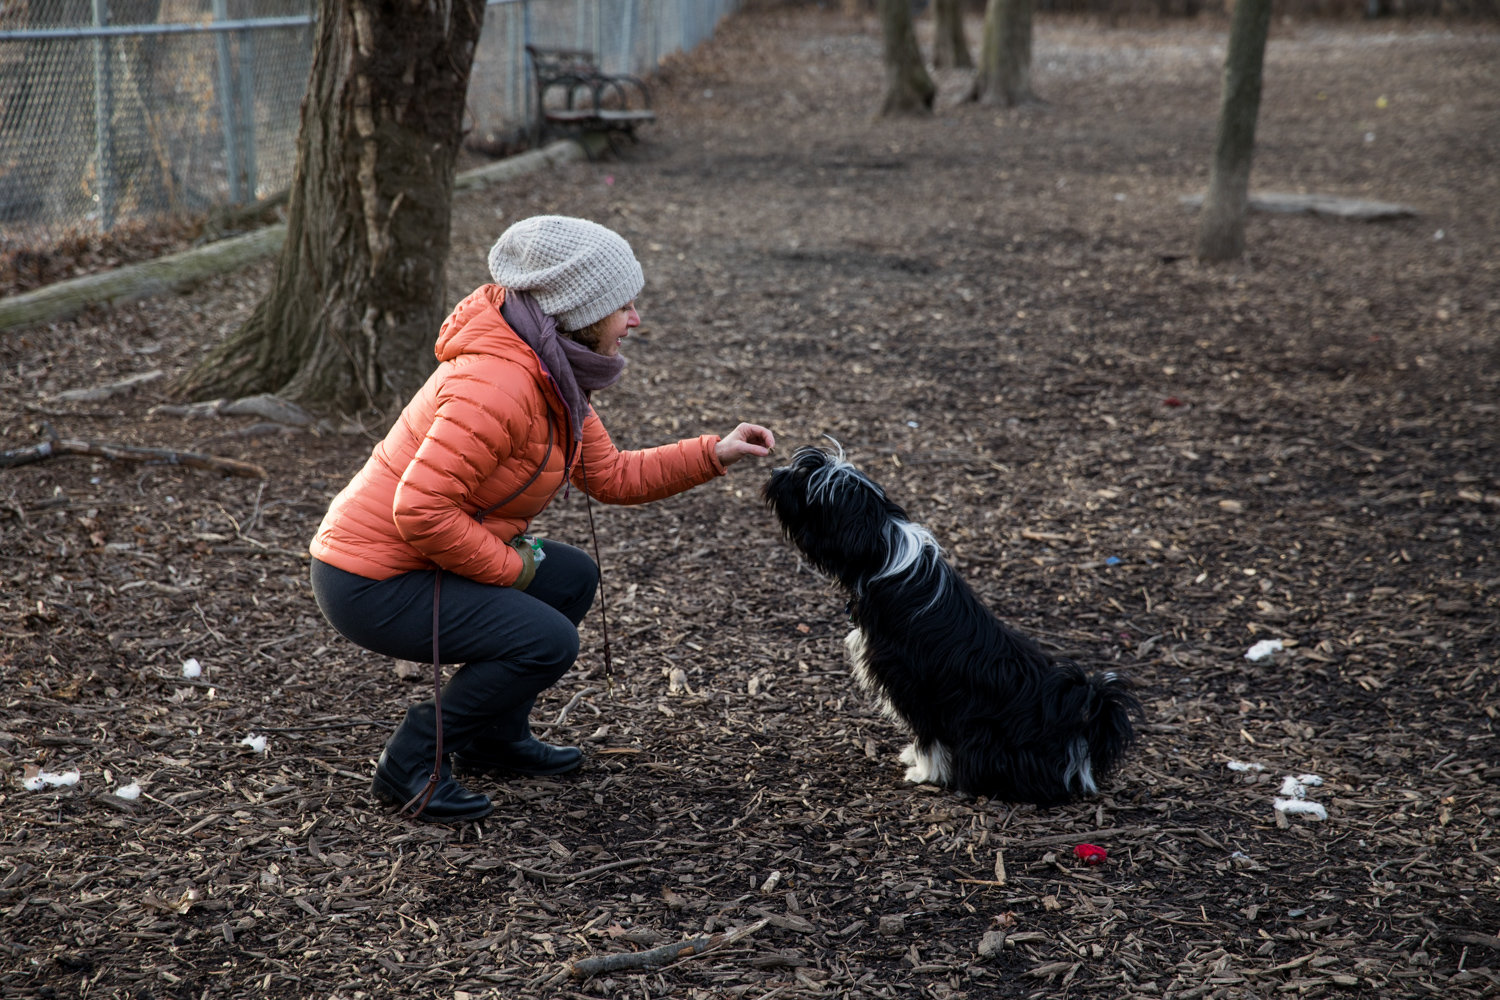 Babi Kruchin feeds a treat to her pet Tashi in the dog run at Seton Park. A Riverdale resident, Kruchin is glad that parts of the park were recently renovated, but wishes the same attention could have been paid to the dog run.